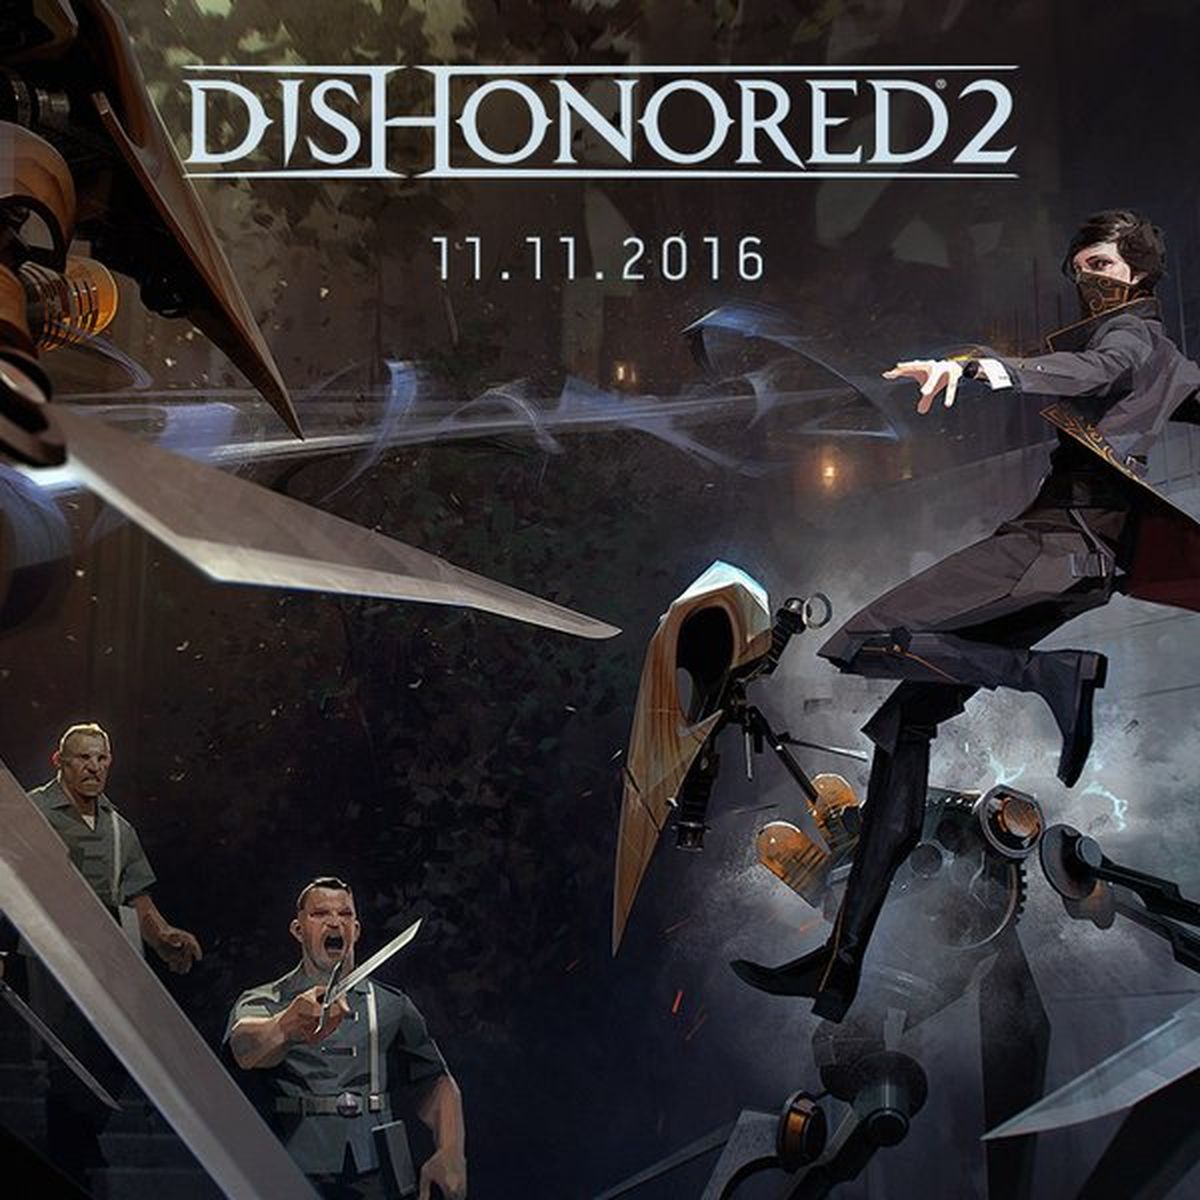 Dishonored 2 - Imágenes